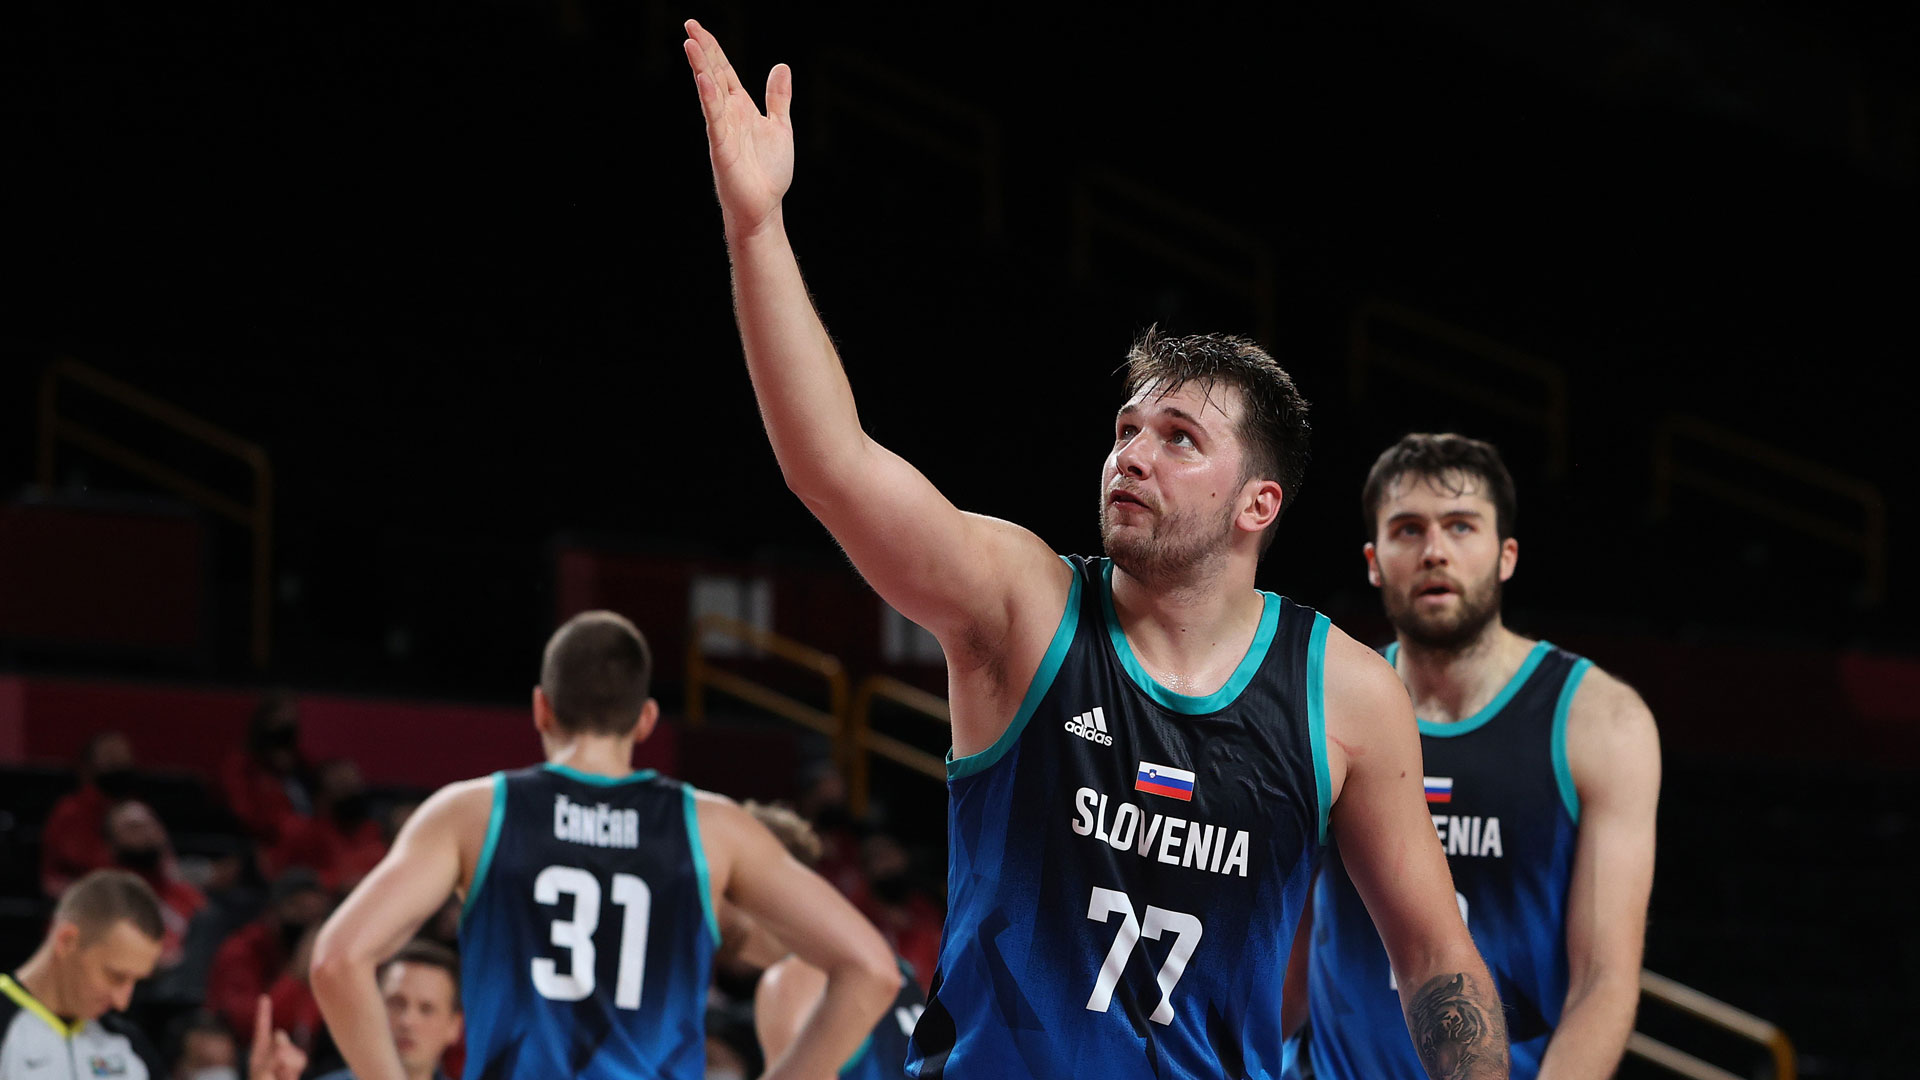 Tokyo 2020: Luka Doncic's masterful triple-double leads Slovenia to  historic Olympics berth